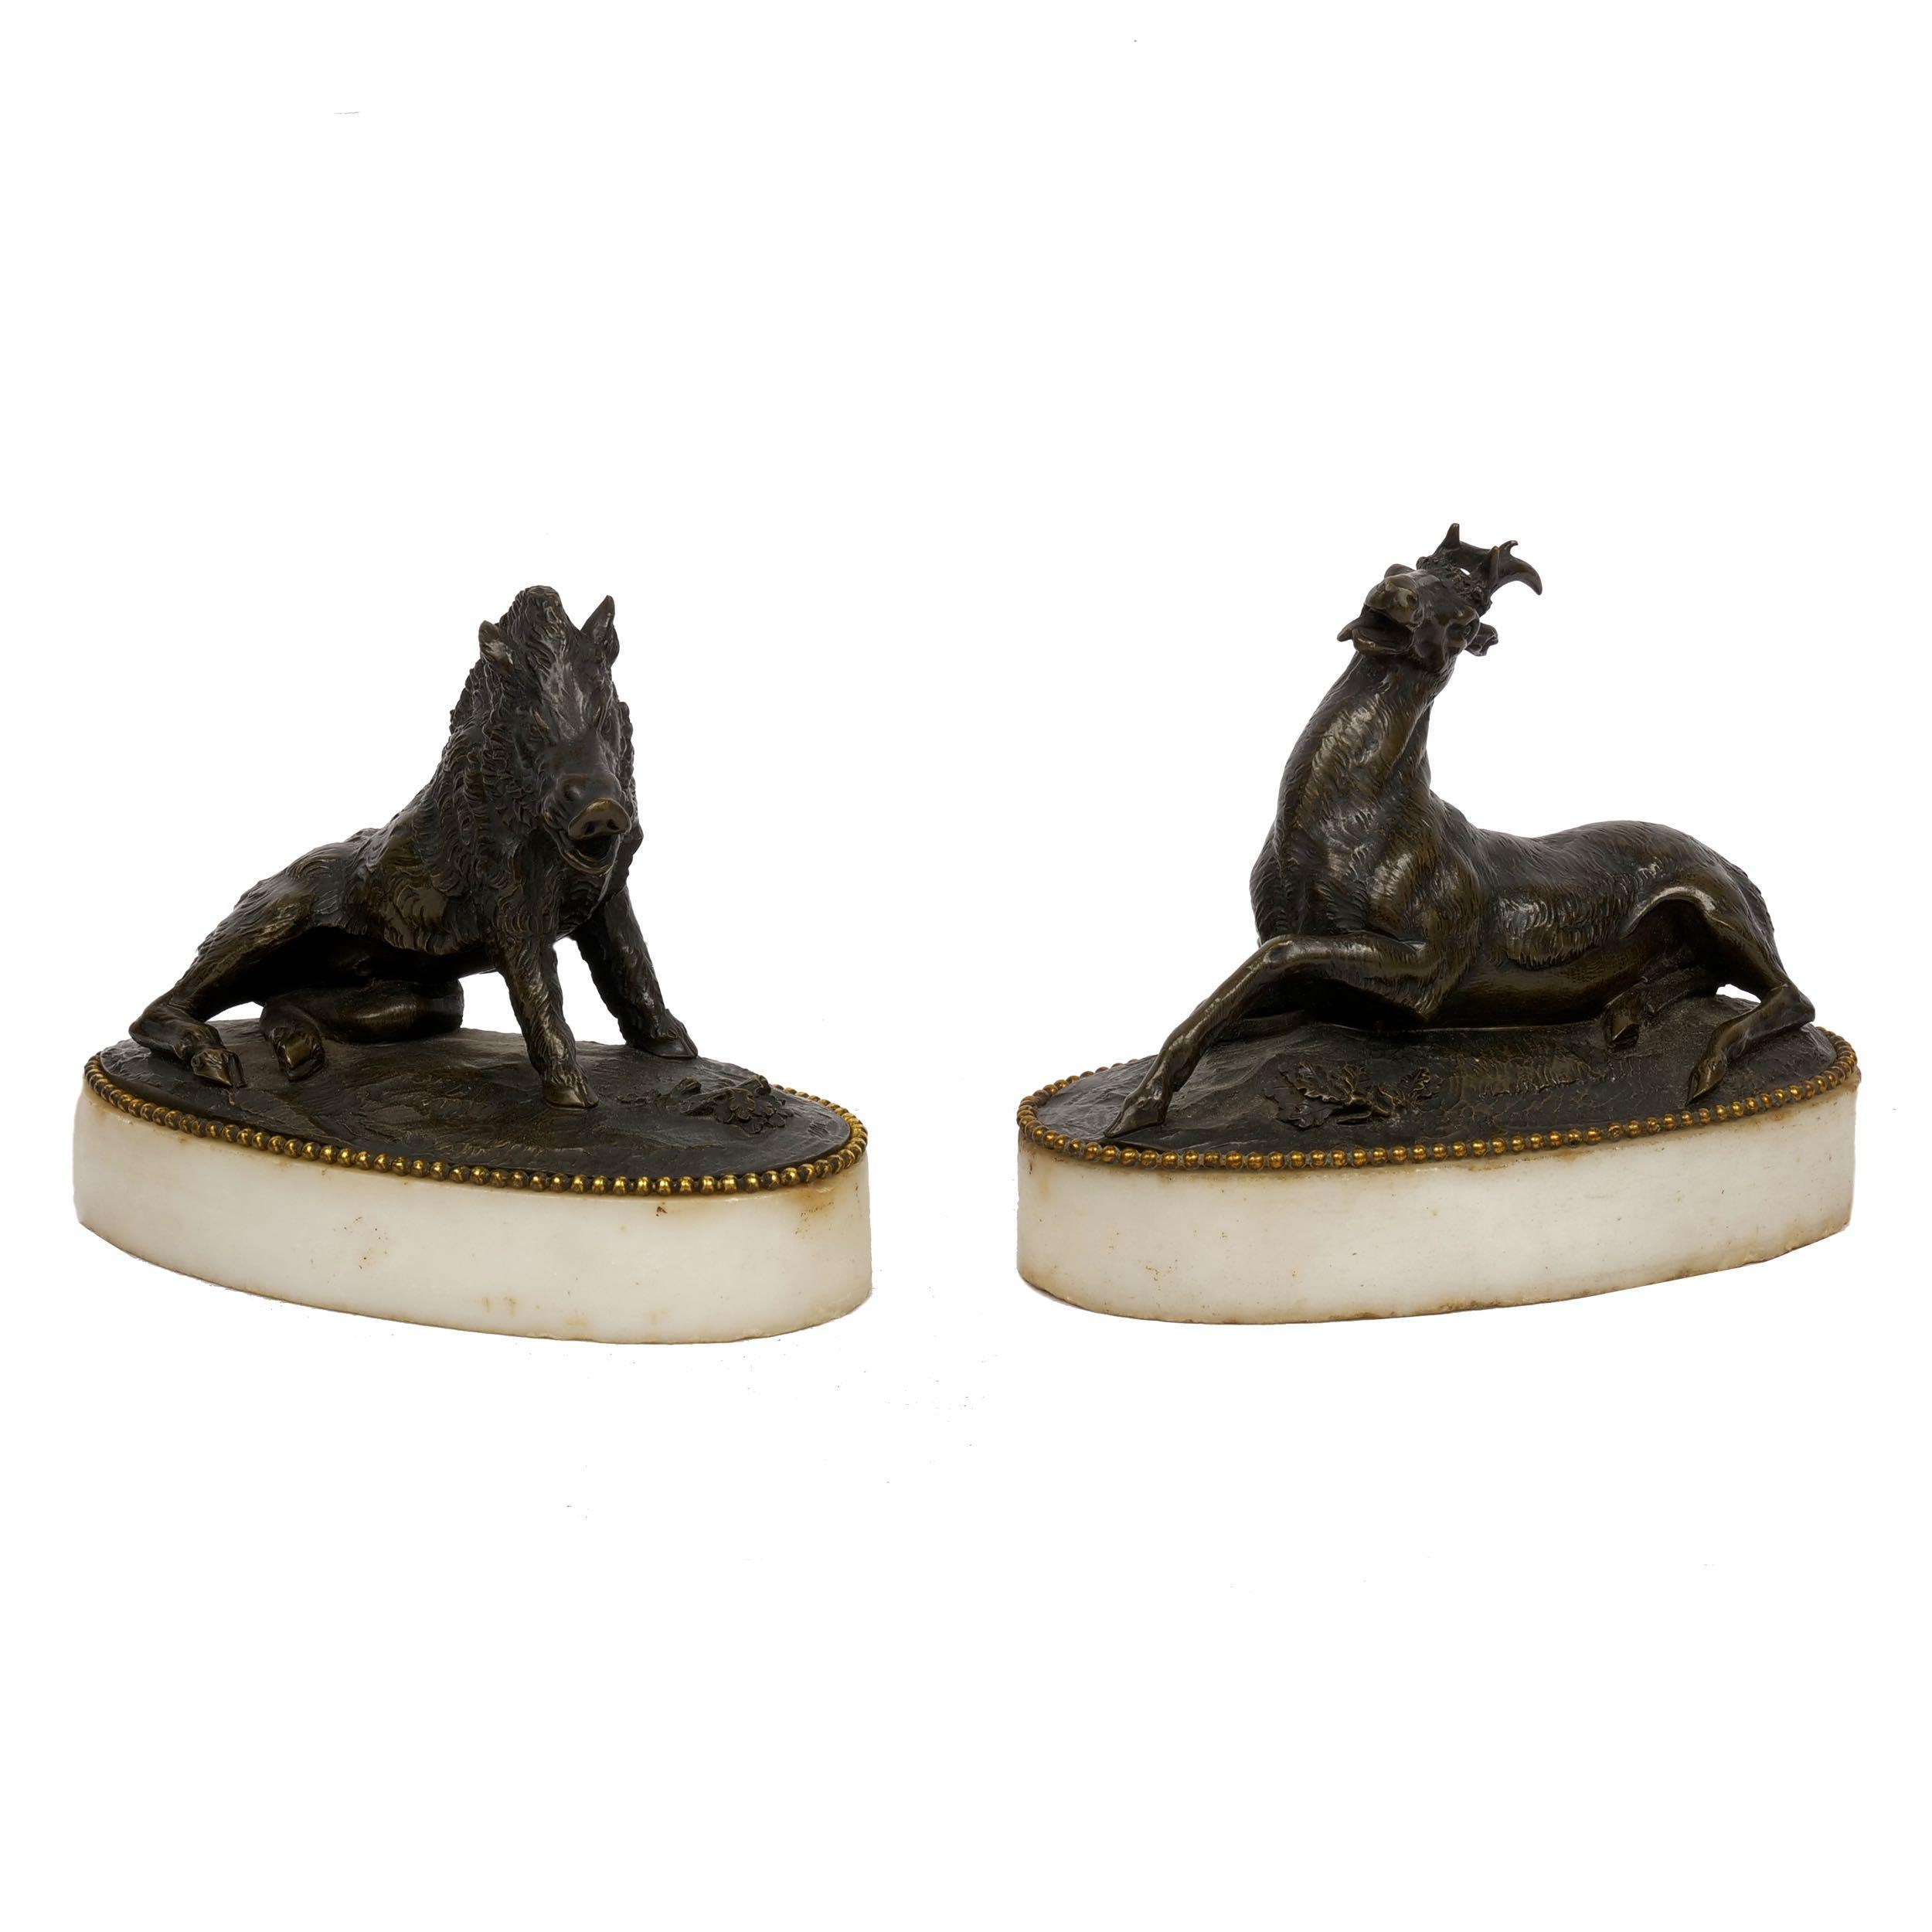 Pair of figural bronze paperweights over cararra marble bases.
circa early 19th century; models of 